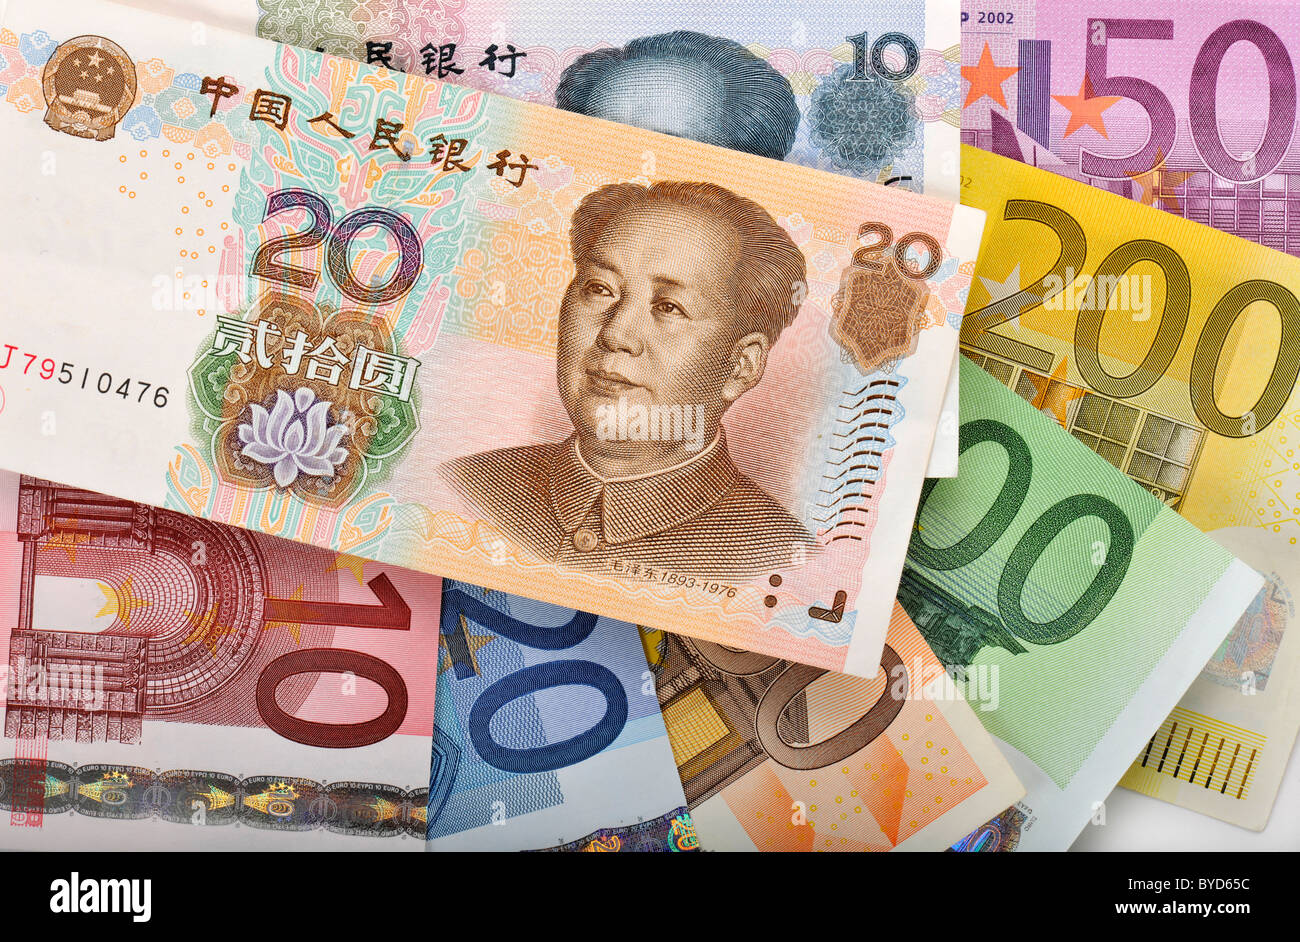 Fan of various euro banknotes and Chinese yuan banknotes, renminbi, the currency of the People's Republic of China, known in the Stock Photo